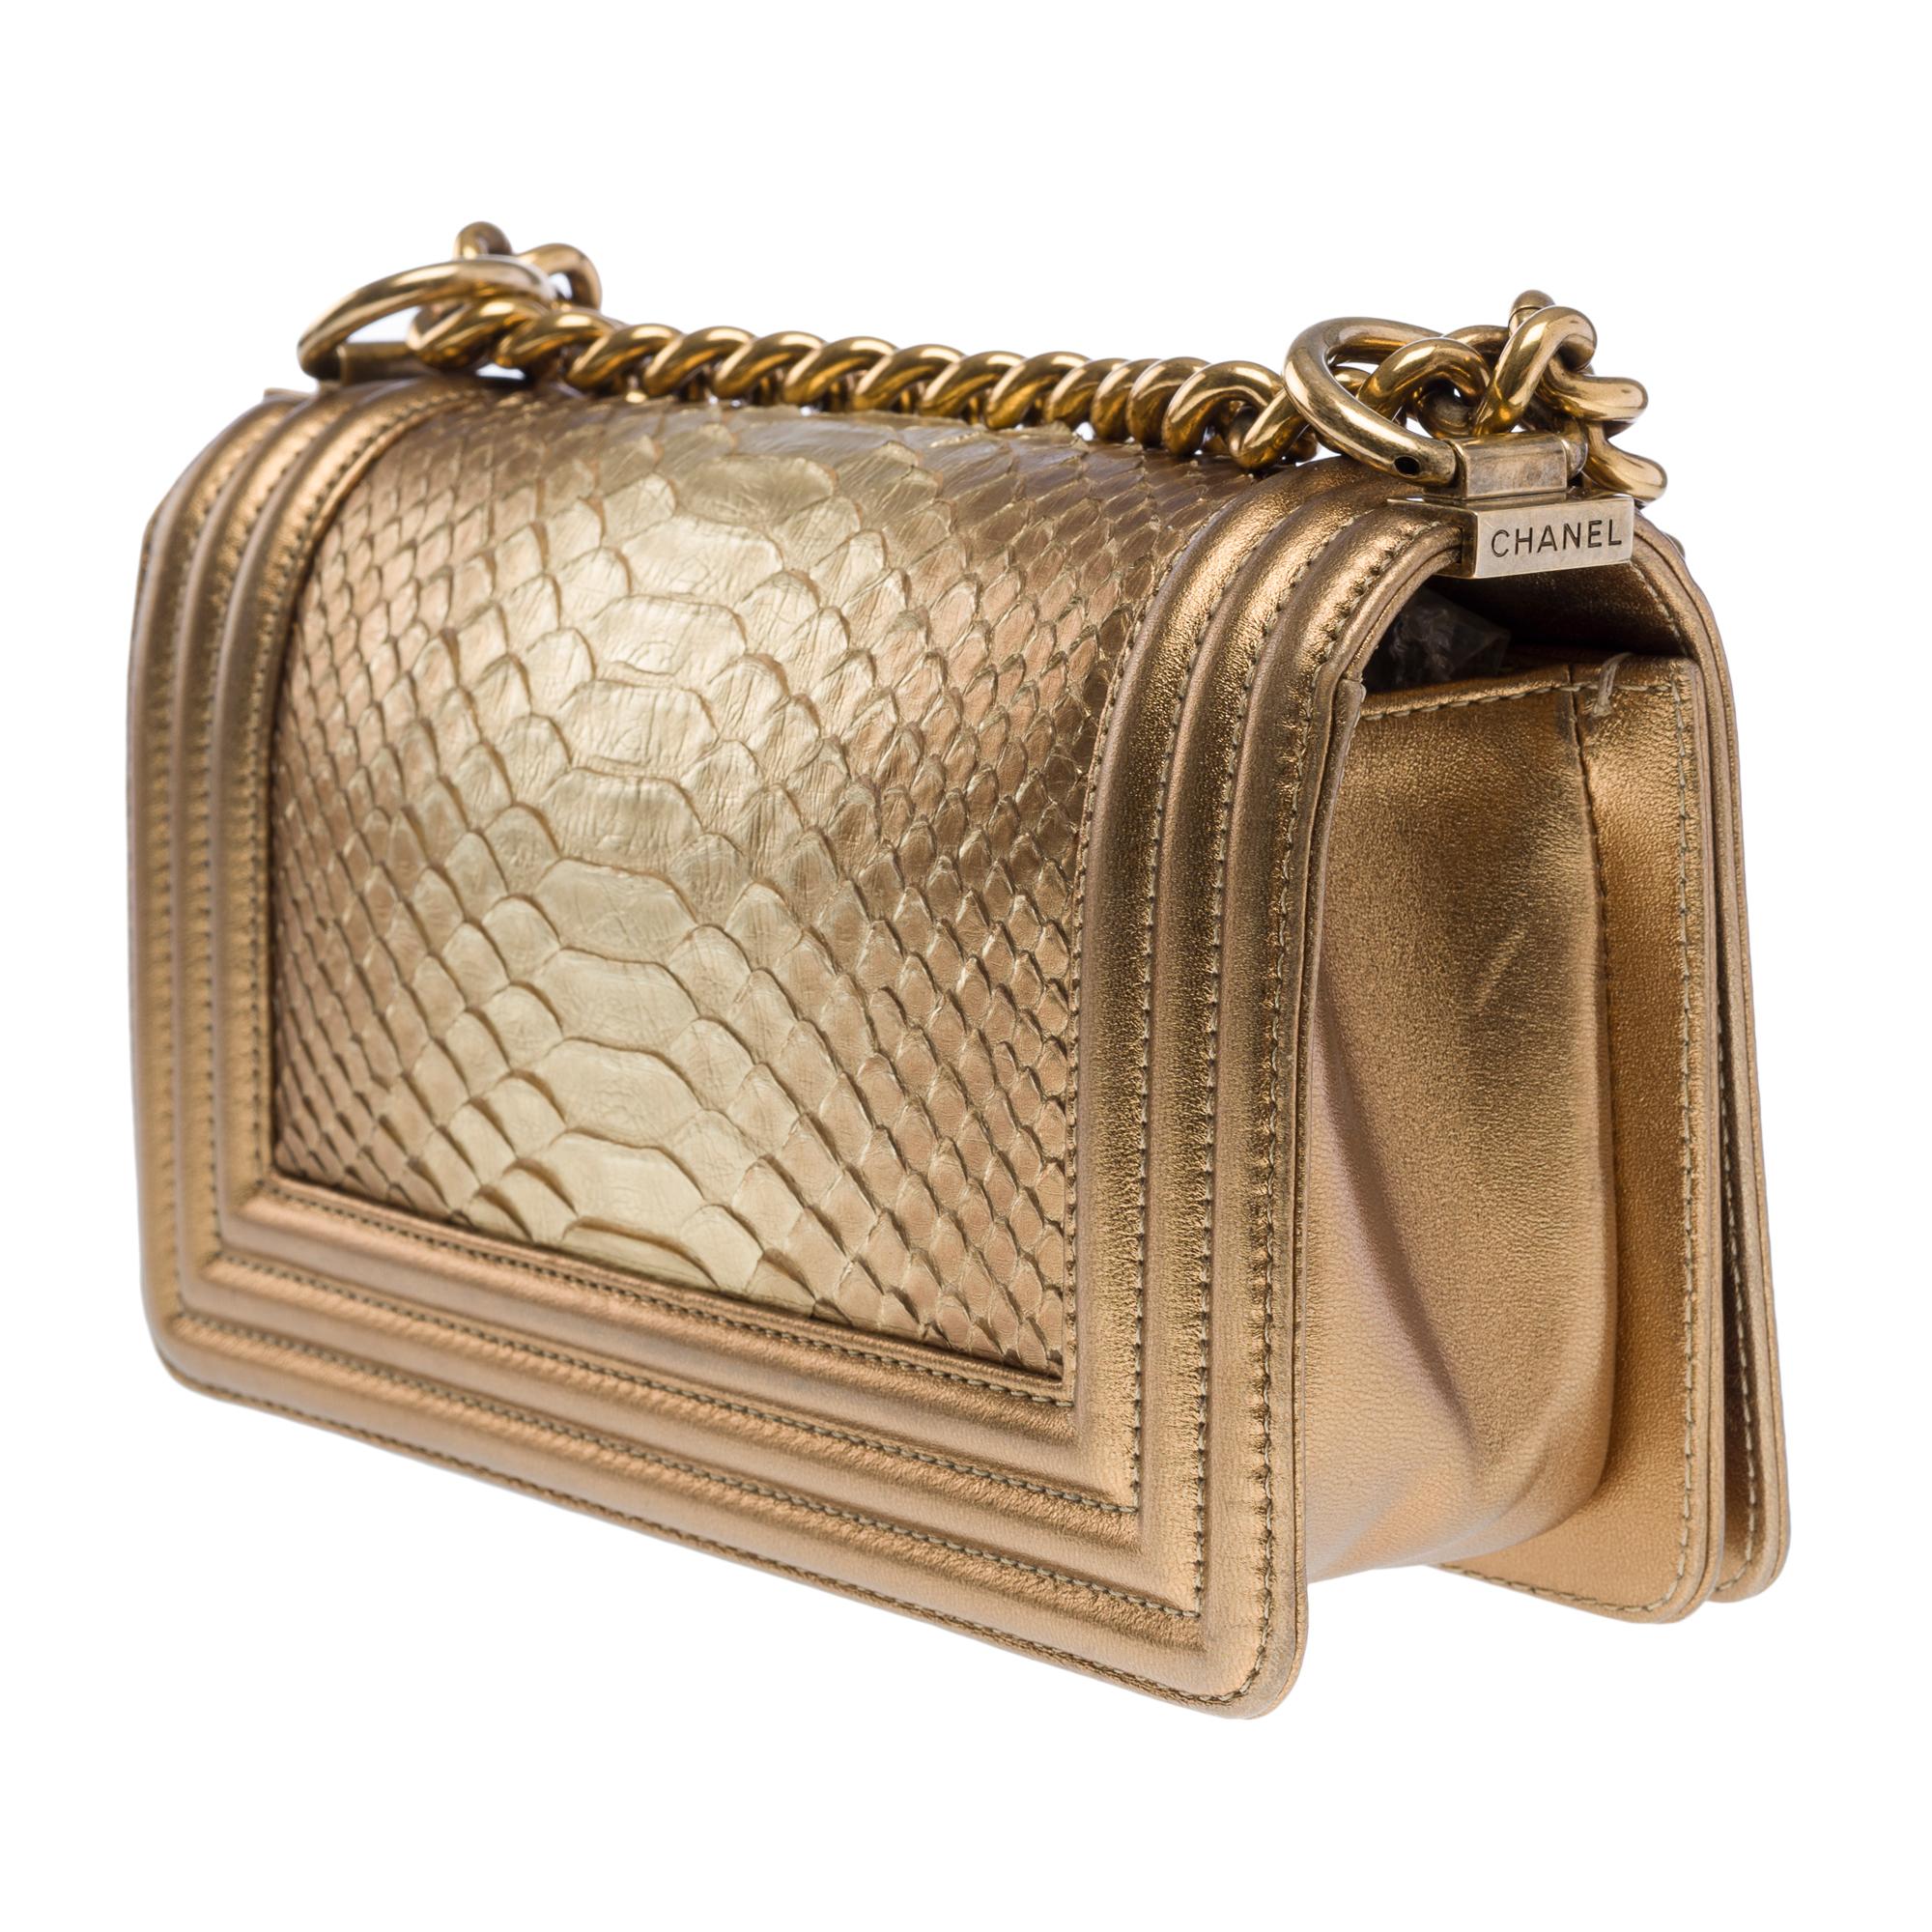 Amazing & Rare Chanel Boy small shoulder bag in Golden Python leather, GHW 2